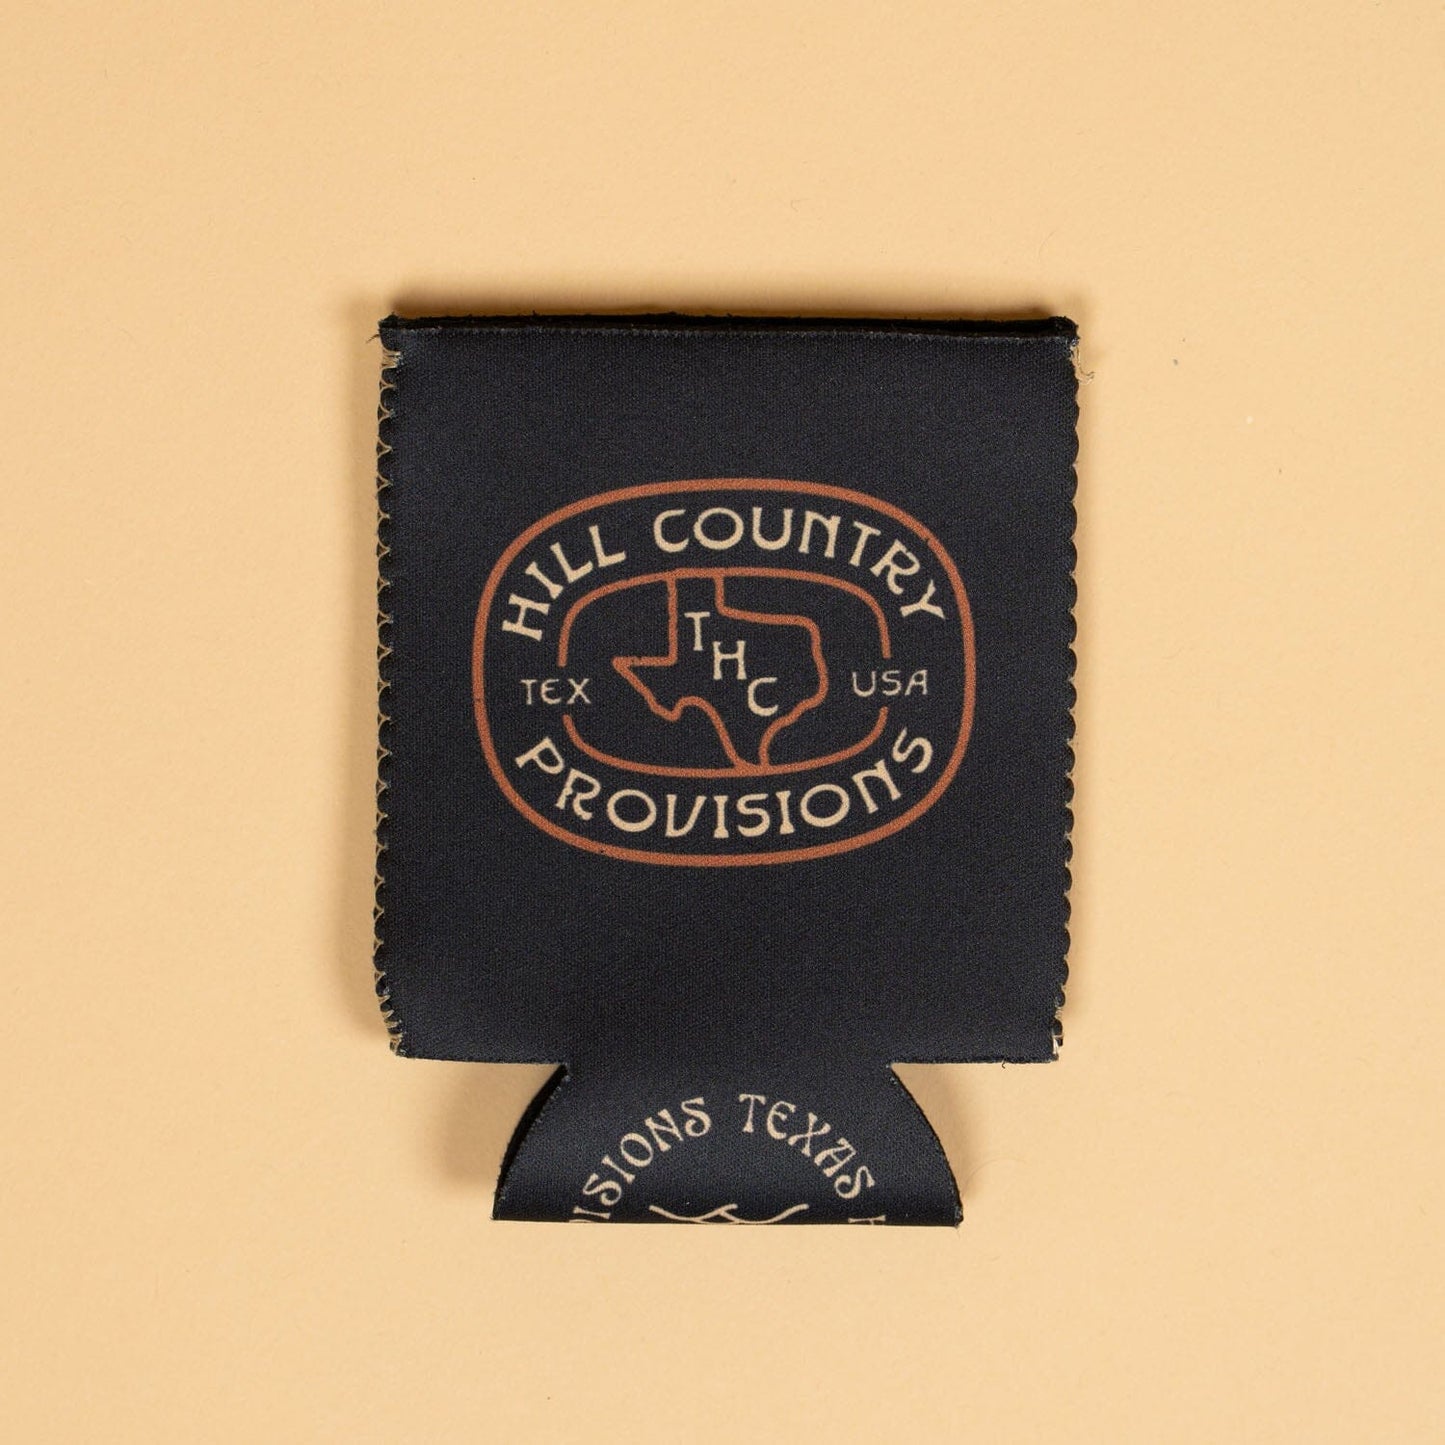 Hill Country Buckle Neoprene Can Sleeve Texas Hill Country Provisions 